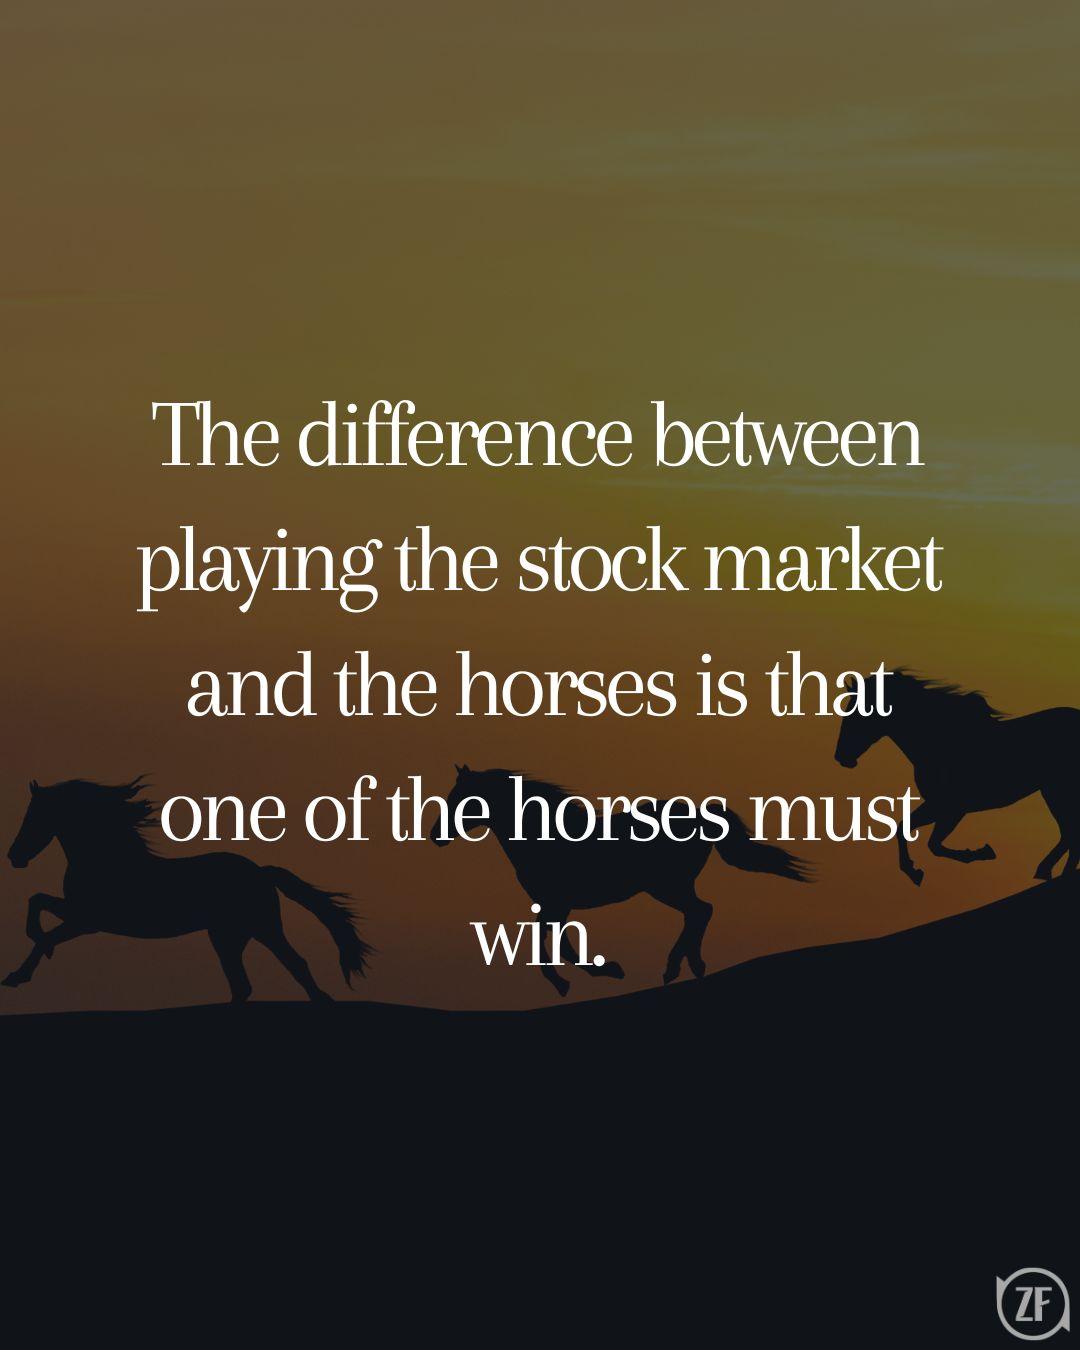 The difference between playing the stock market and the horses is that one of the horses must win.